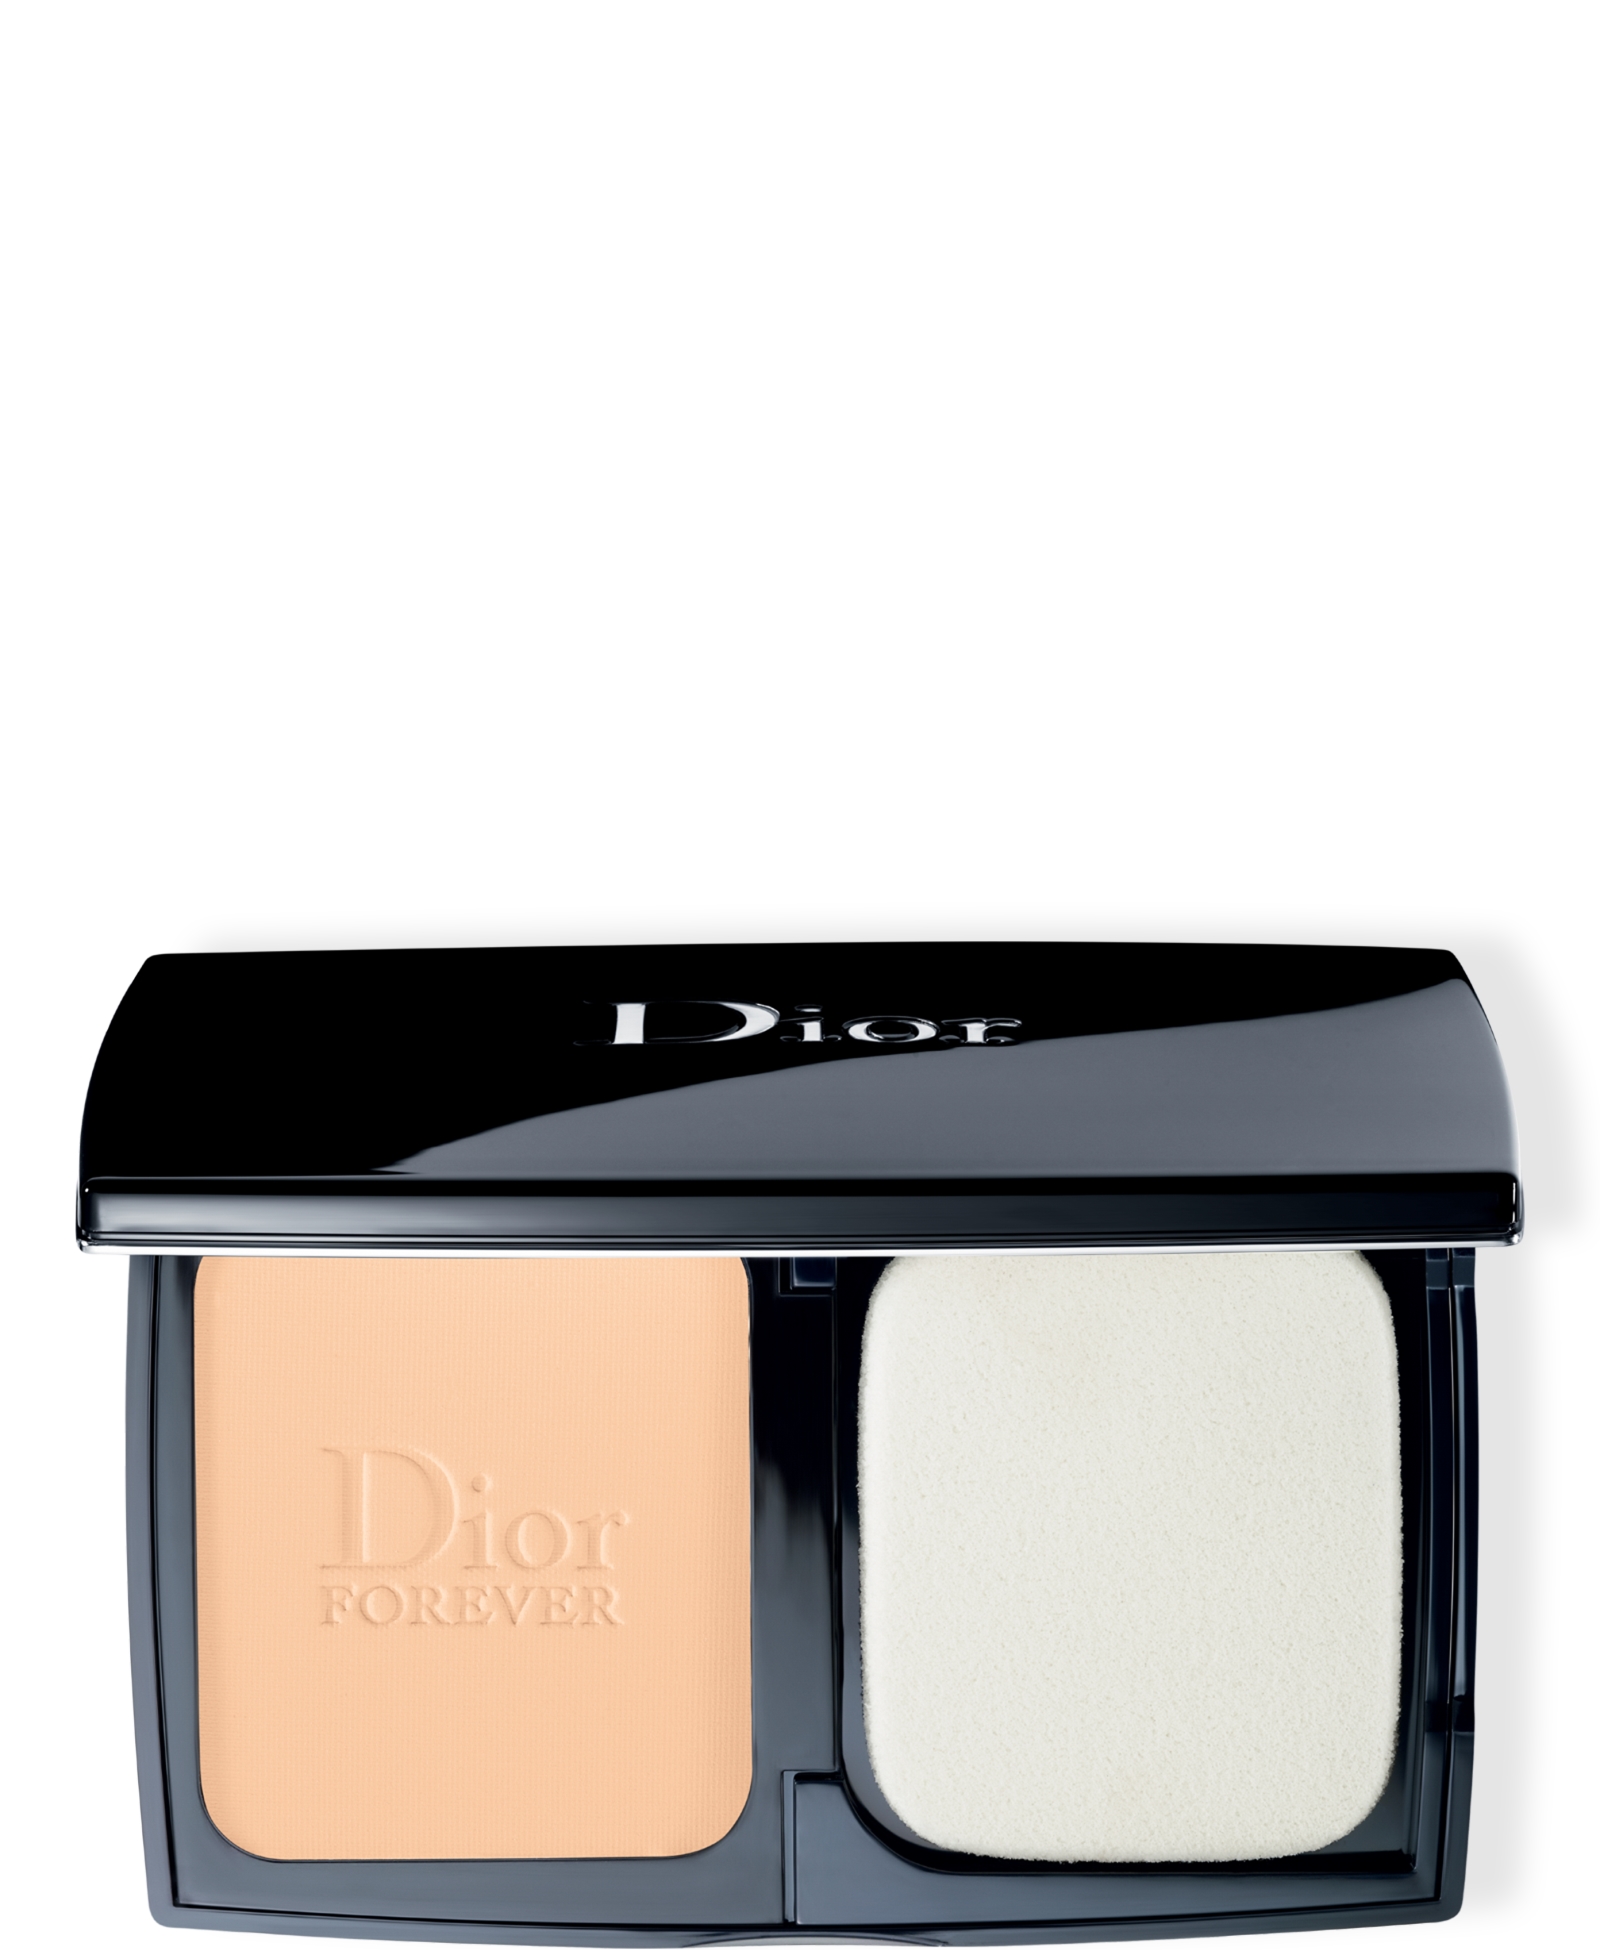  skin Forever Foundation Compact